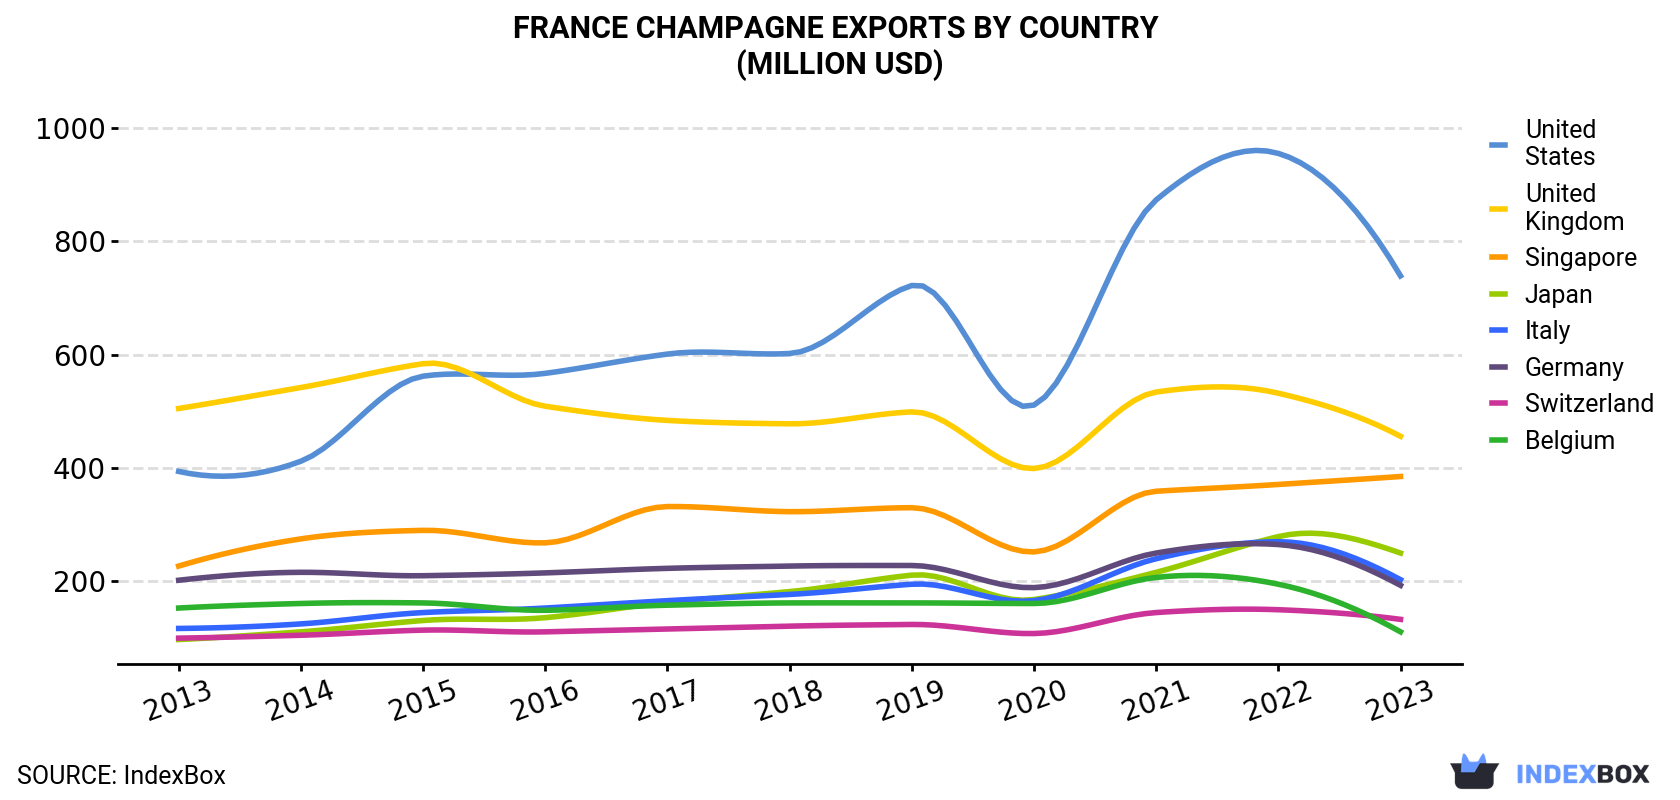 France Champagne Exports By Country (Million USD)